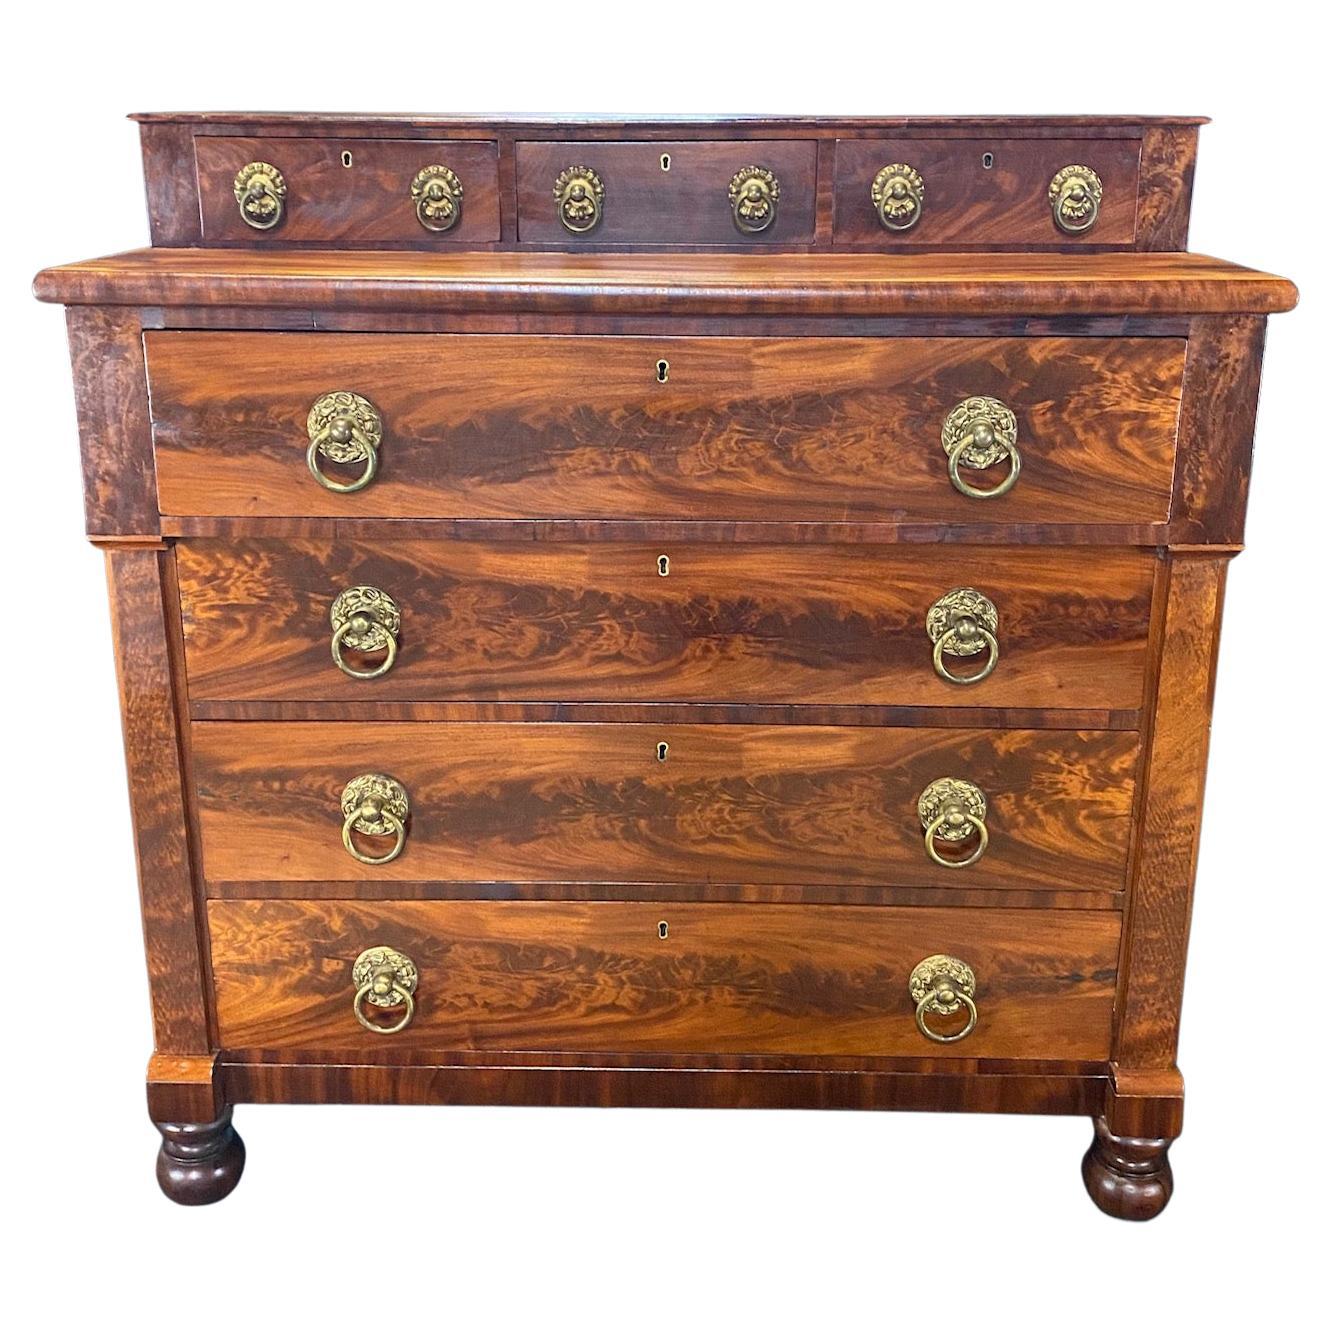 19th Century Sheraton Step Back Burled Mahogany Seven Drawer Chest of Drawers For Sale